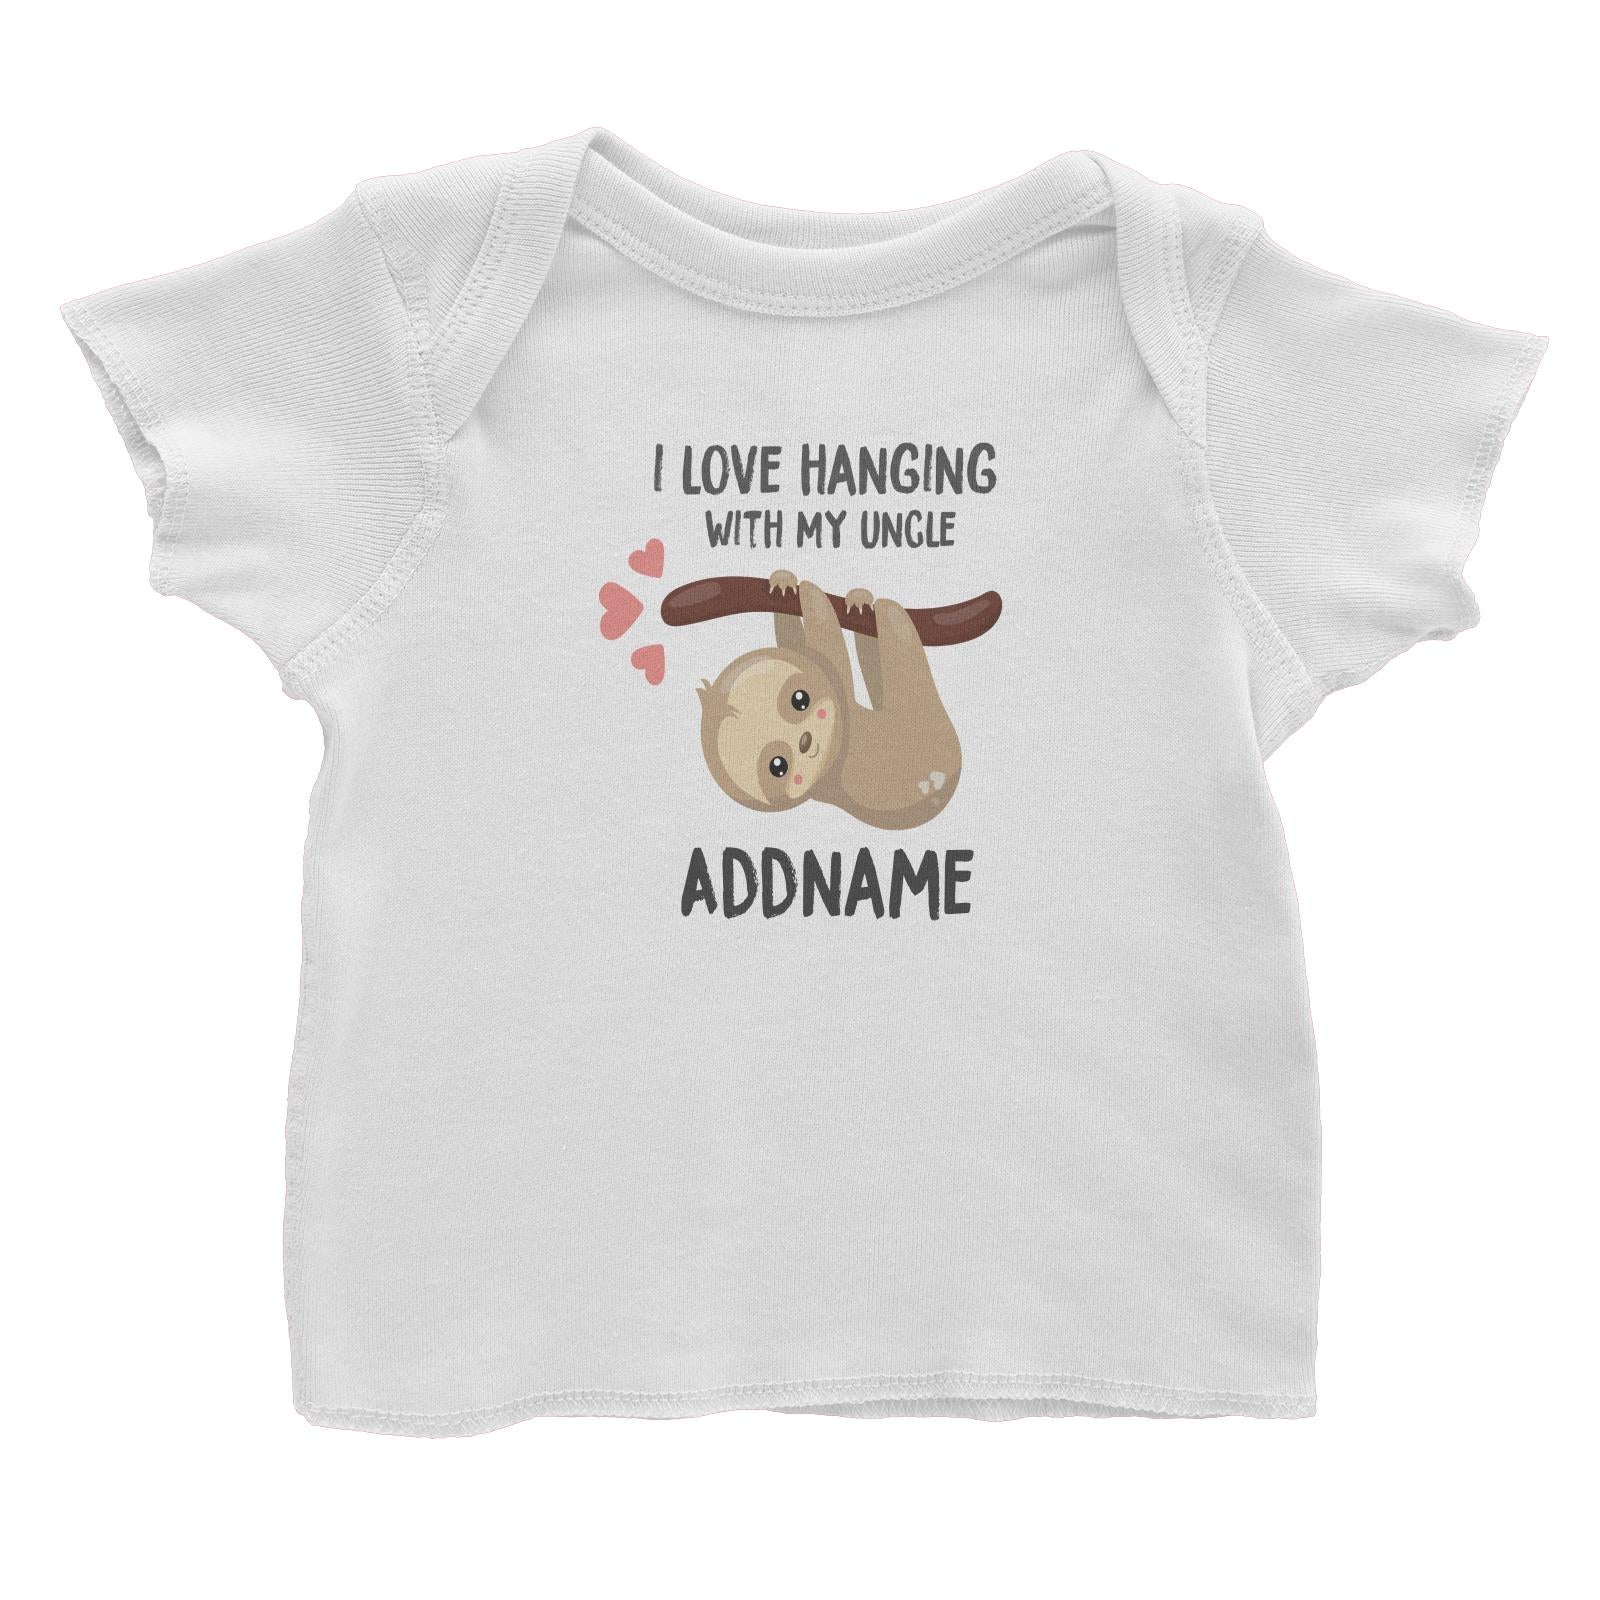 Cute Sloth I Love Hanging With My Uncle Addname Baby T-Shirt